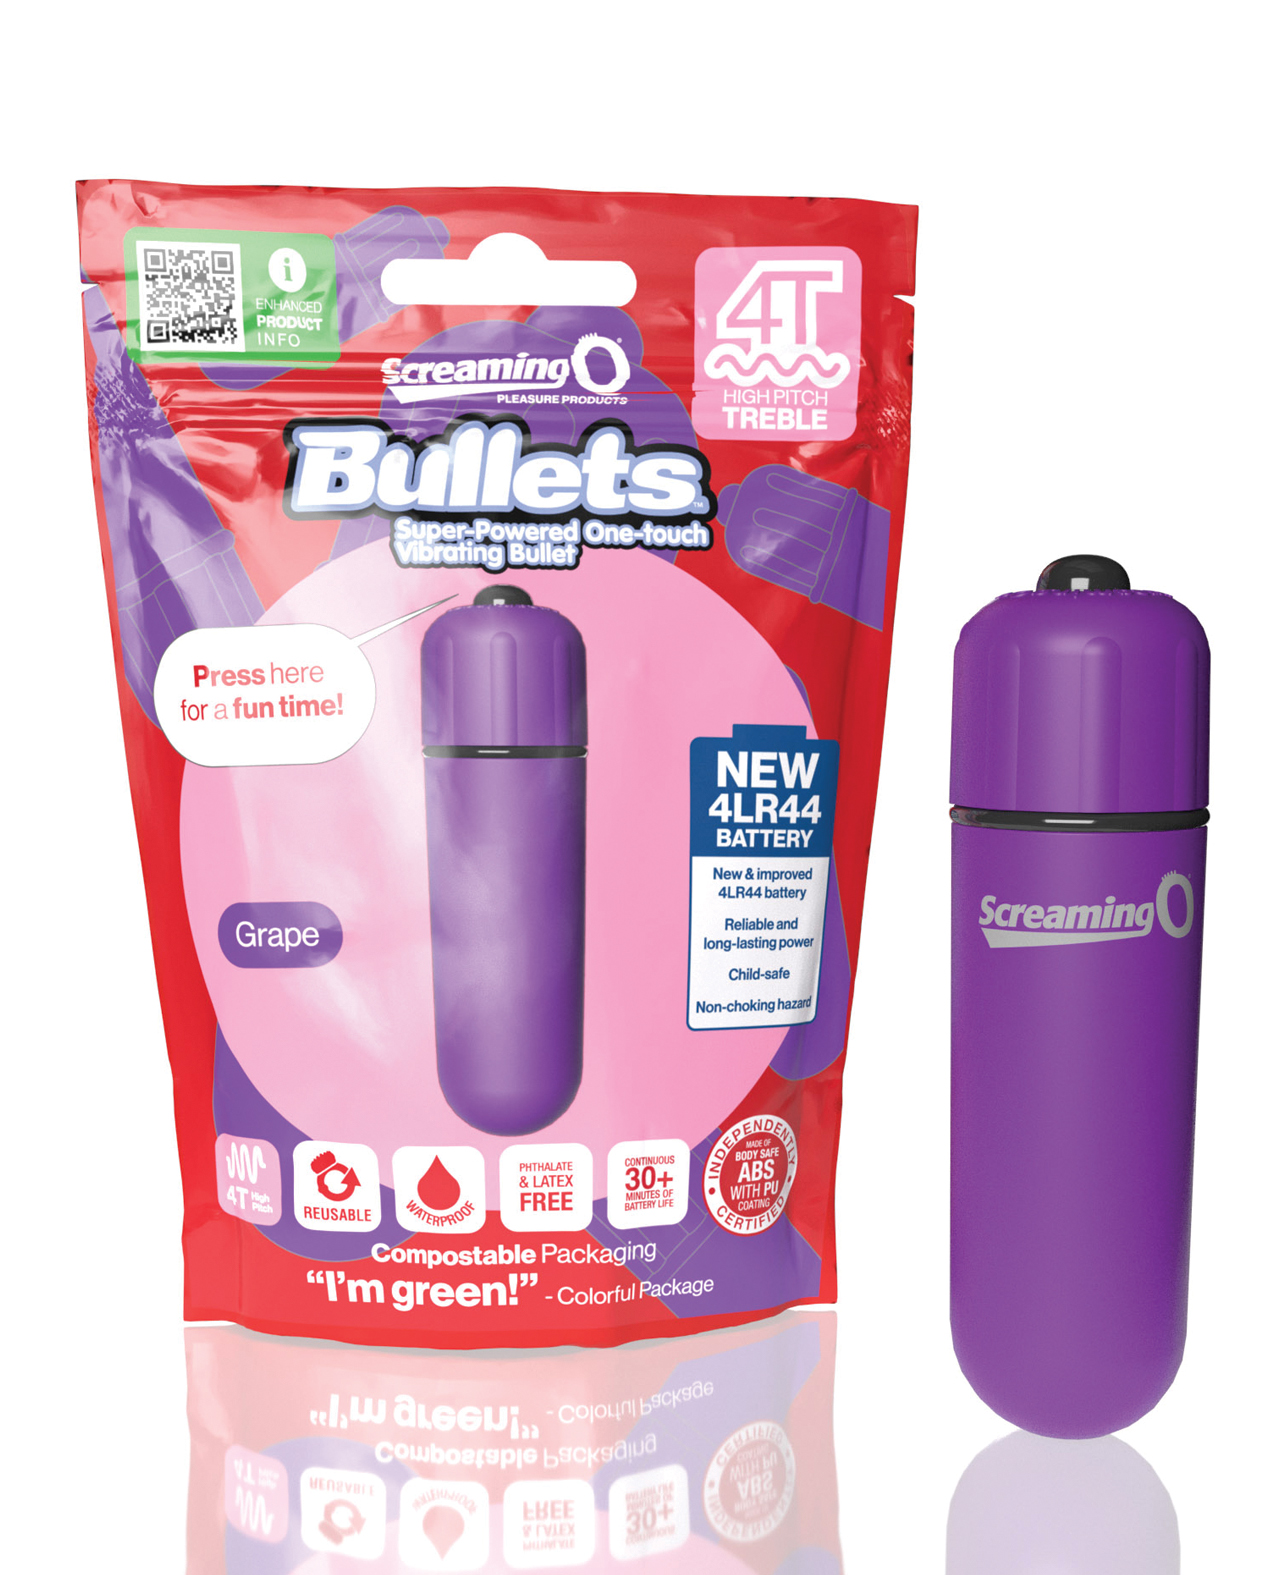 Purple bullet vibe standing next to the pink and purple Screaming O packaging